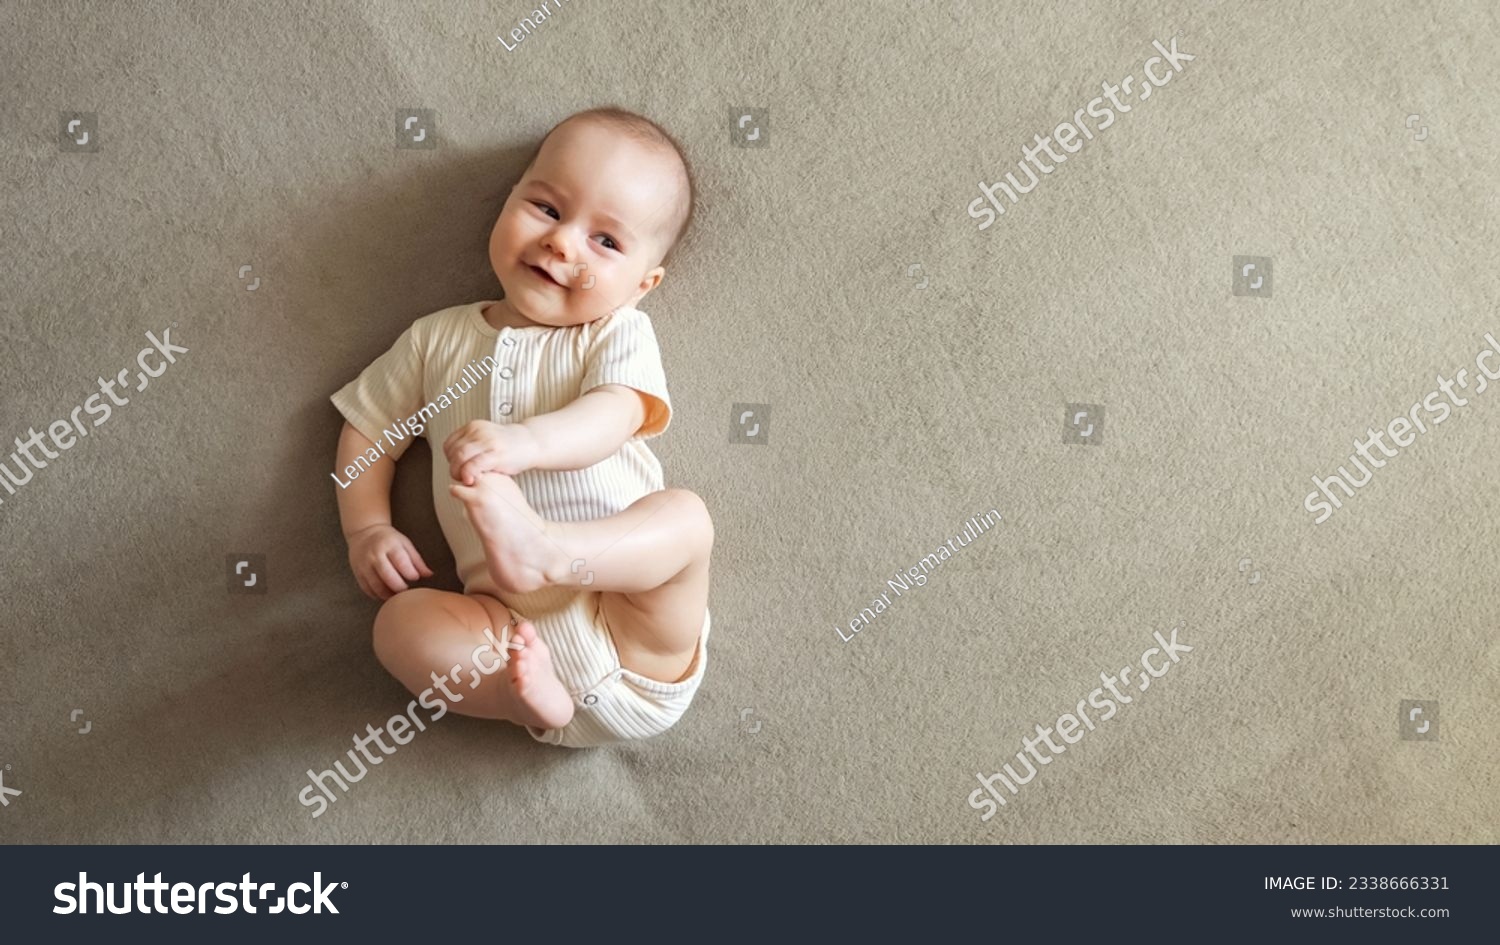 Infant lying on brown bed smiling with joy. Baby girl with delighted expression plays touching toes with hands and relaxing on bed, copyspace #2338666331